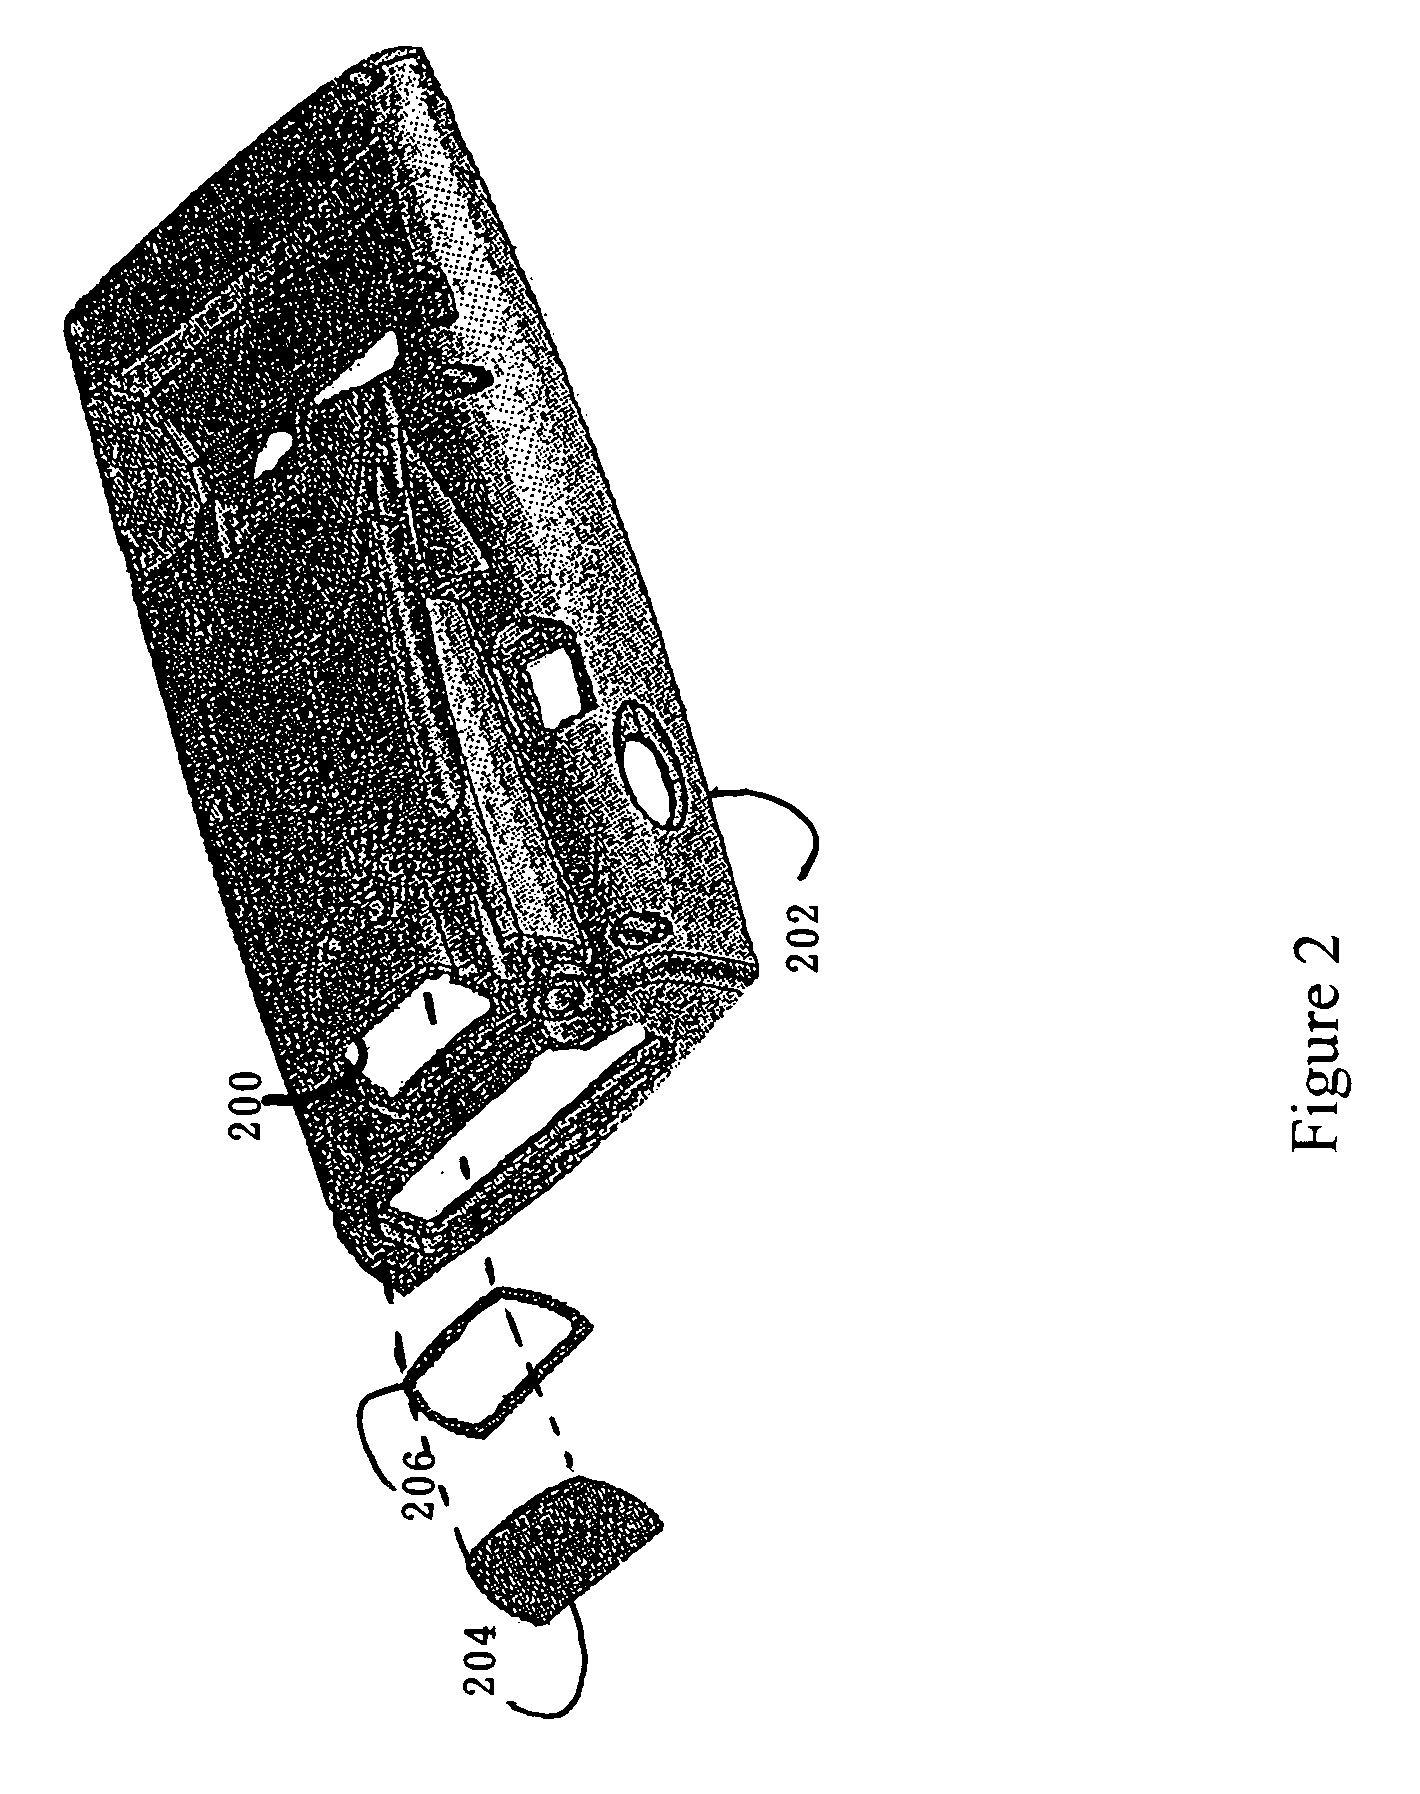 Versatile window system for information gathering systems